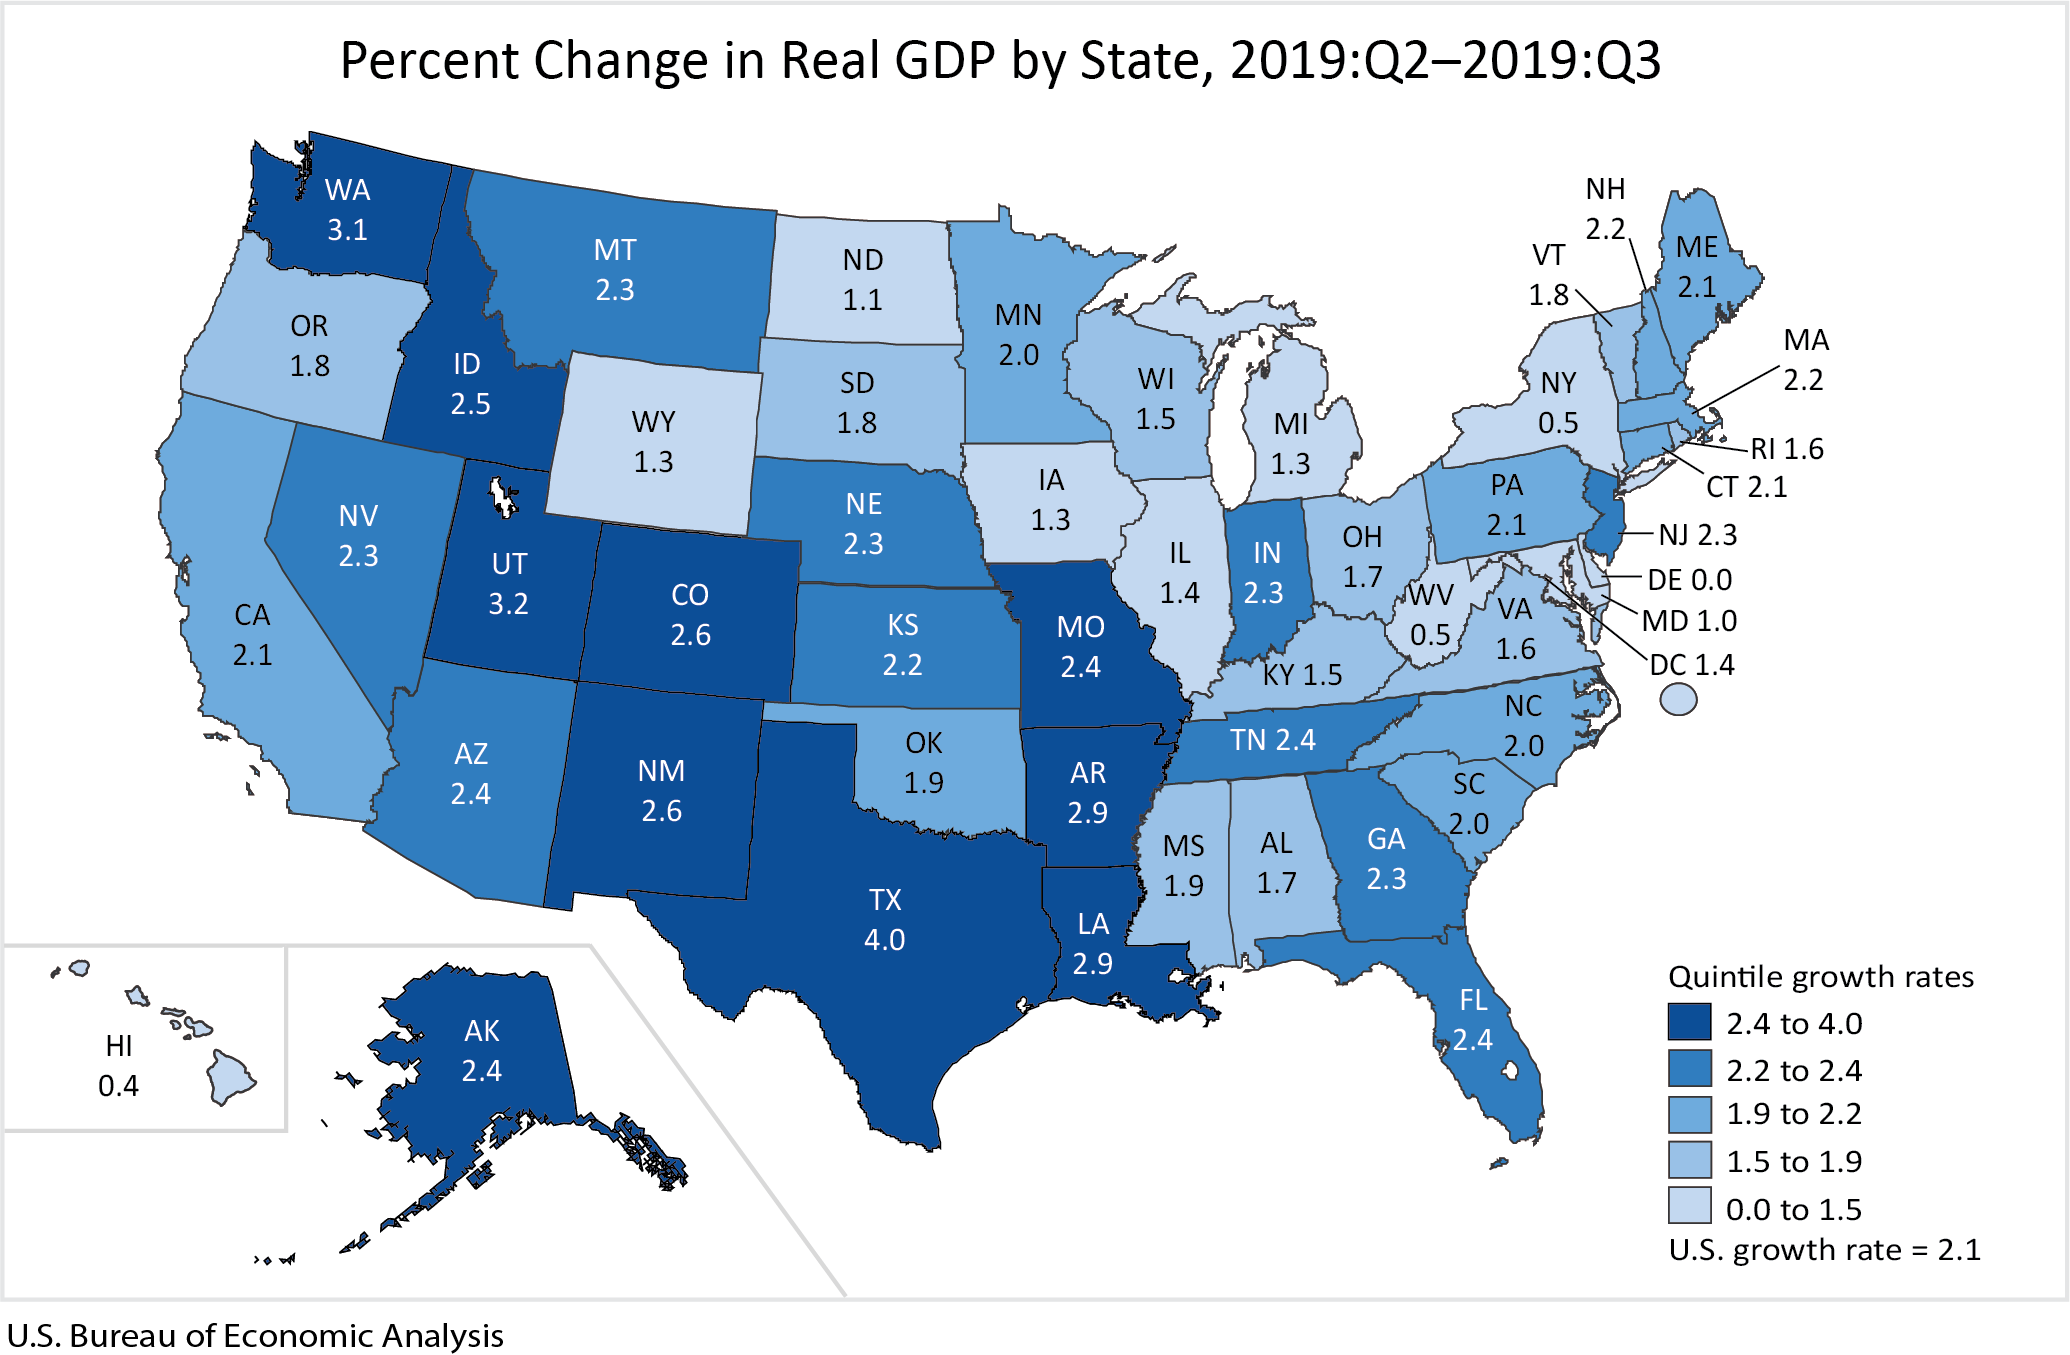 Percent Change in Real GDP by State, 2019:Q2-2019:Q3